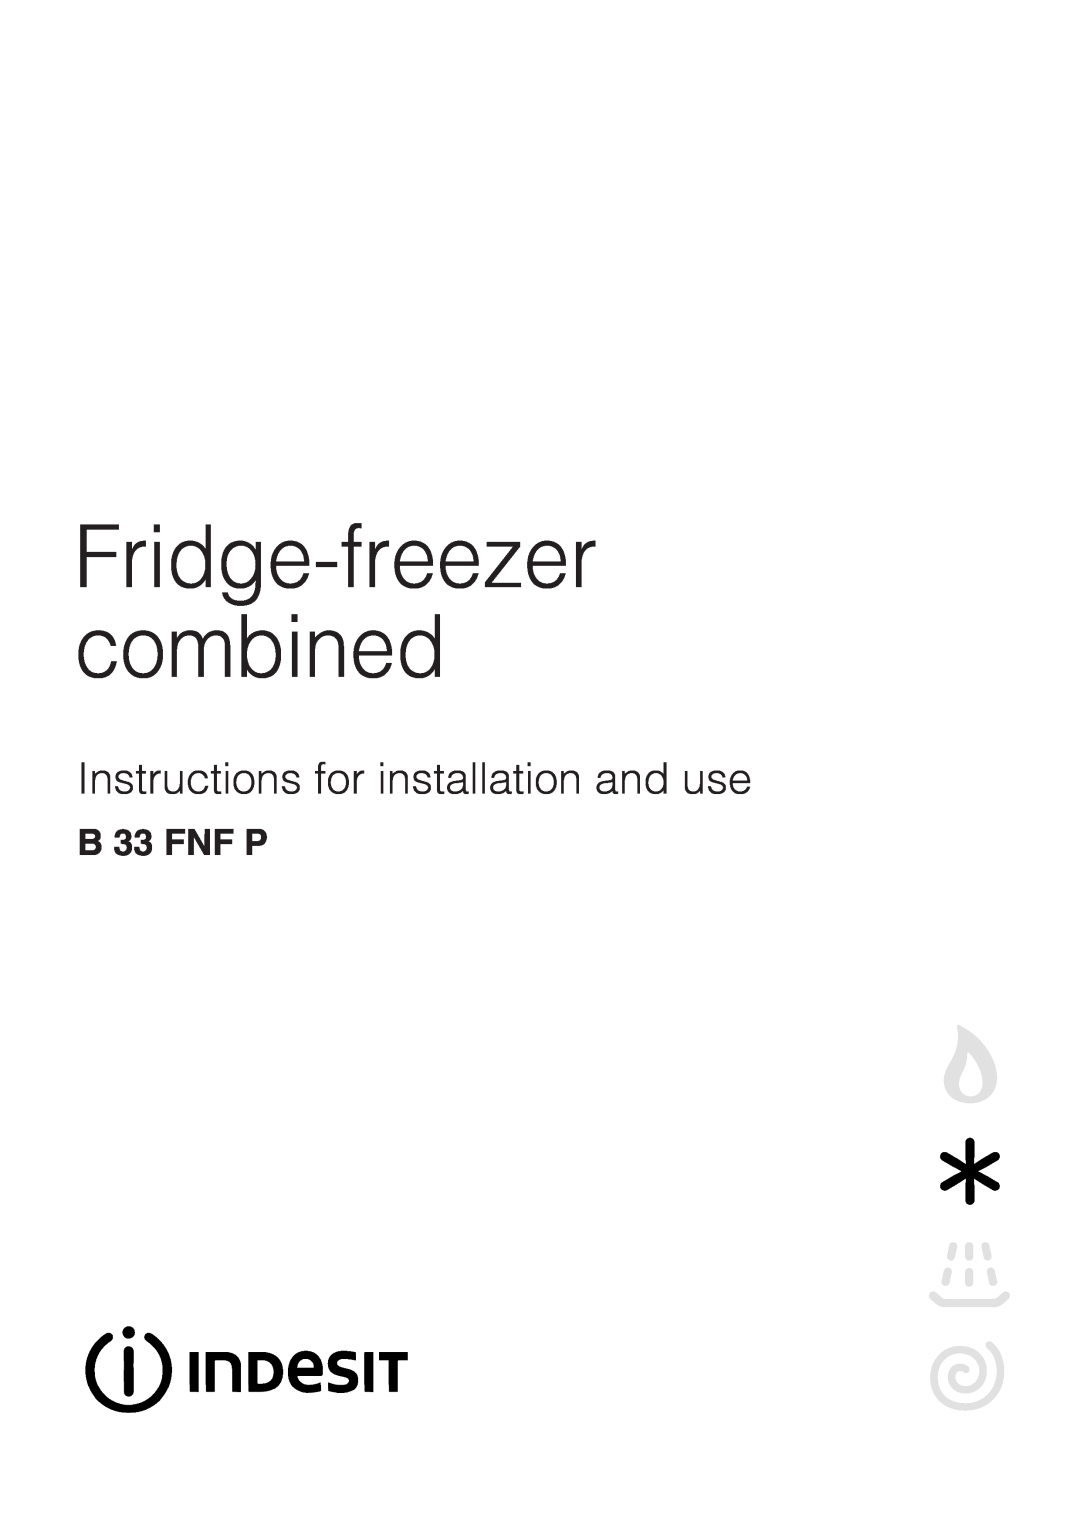 Indesit B 33 FNF P manual Fridge-freezer combined, Instructions for installation and use 